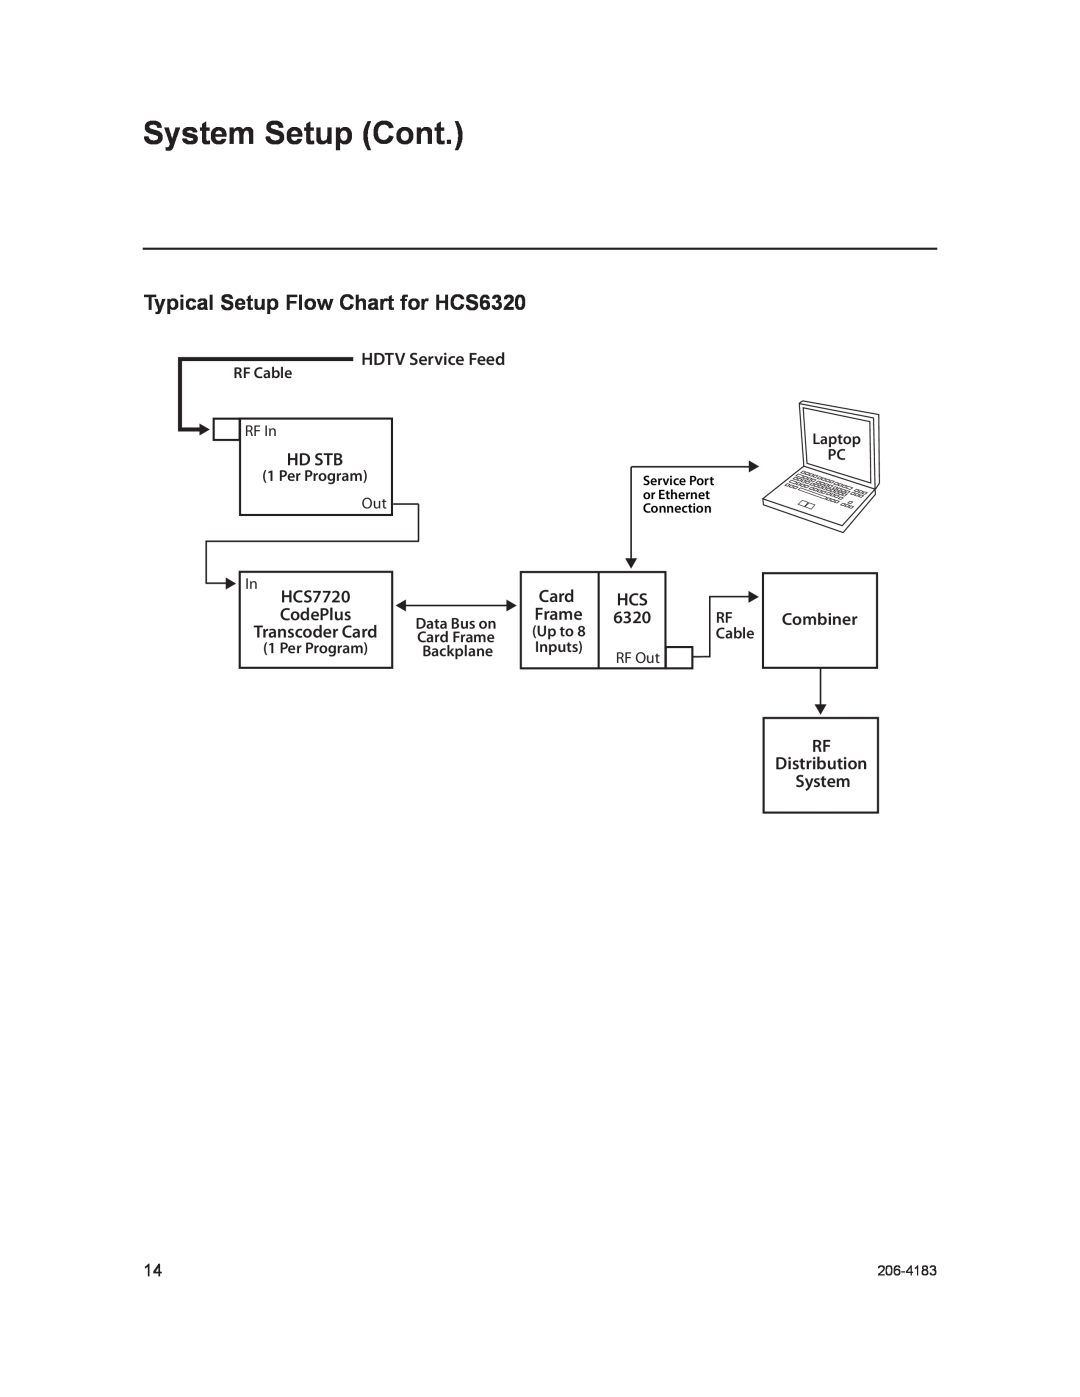 LG Electronics System Setup Cont, Typical Setup Flow Chart for HCS6320, HDTV Service Feed, Hd Stb, Card, Combiner 